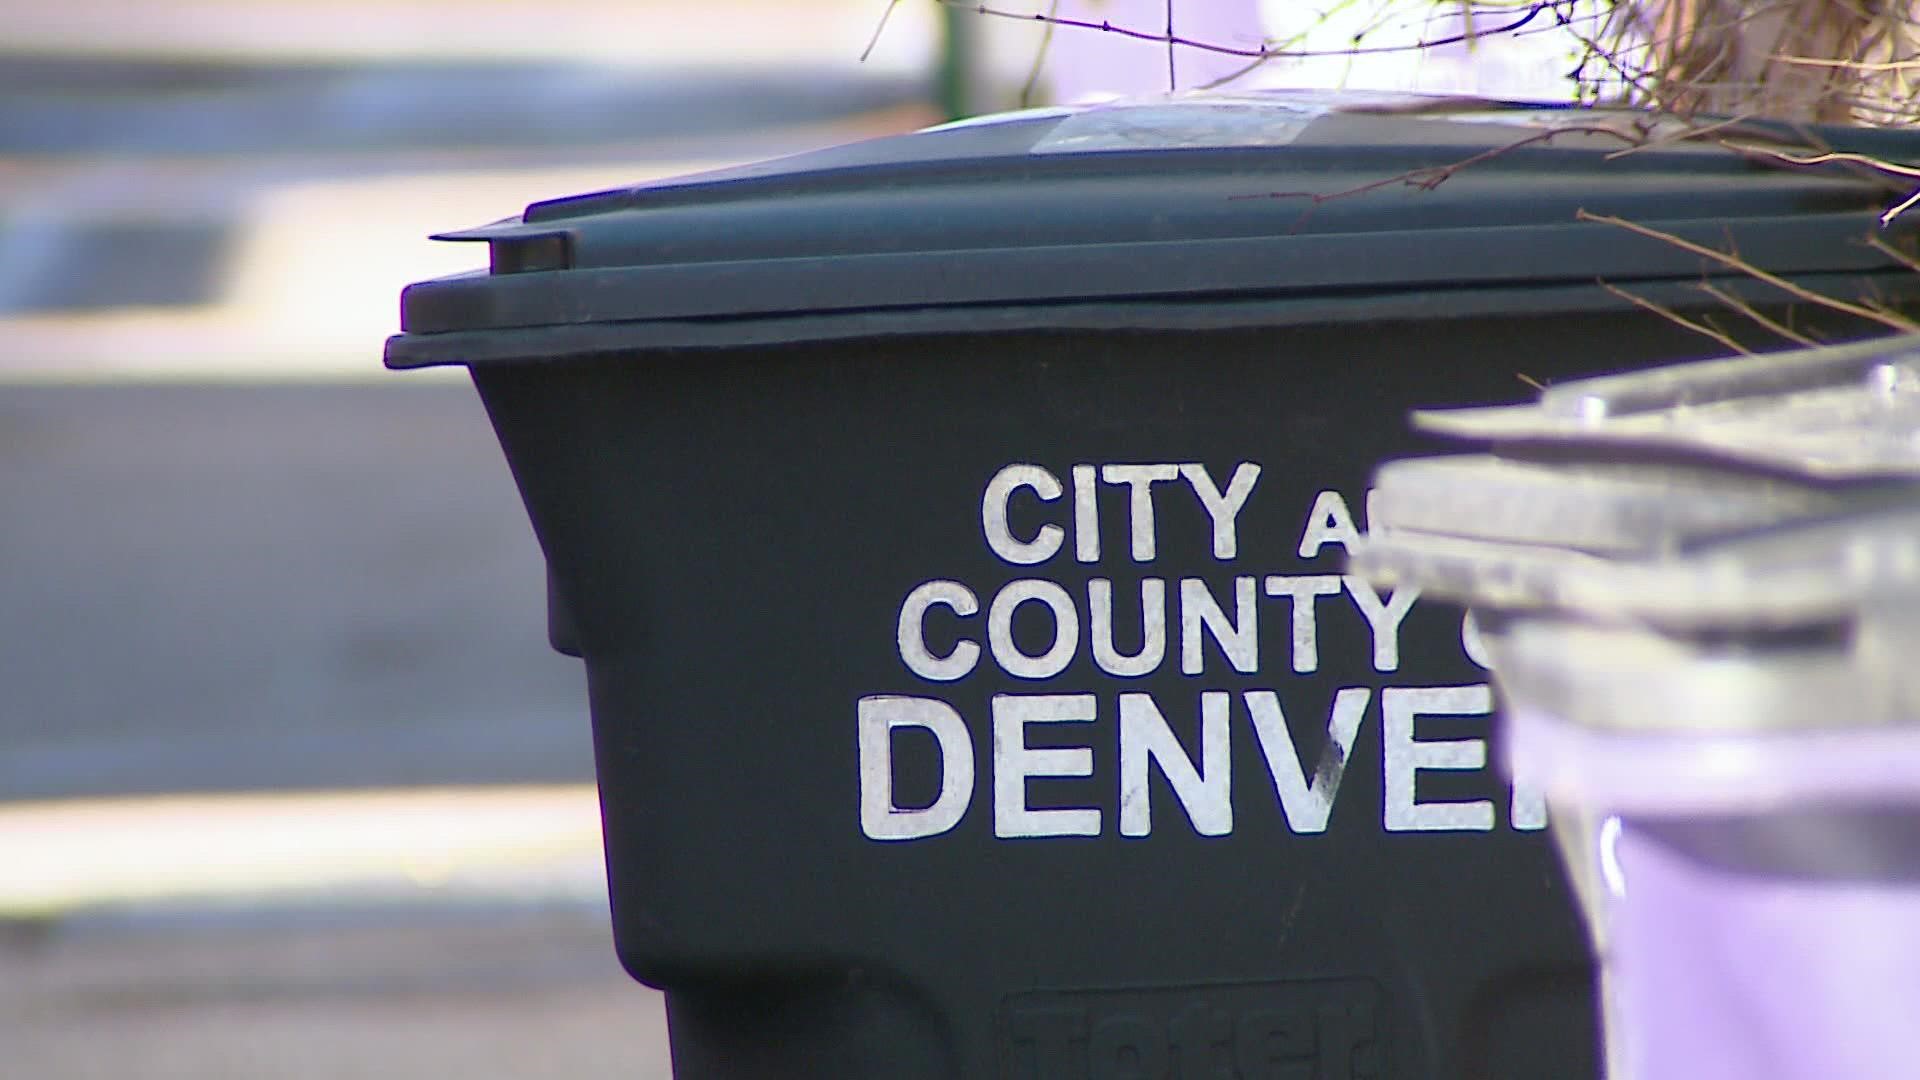 Denver is considering charging* new fees for trash pick-ups, in order to keep cut back on the amount of waste that ends up in landfills.